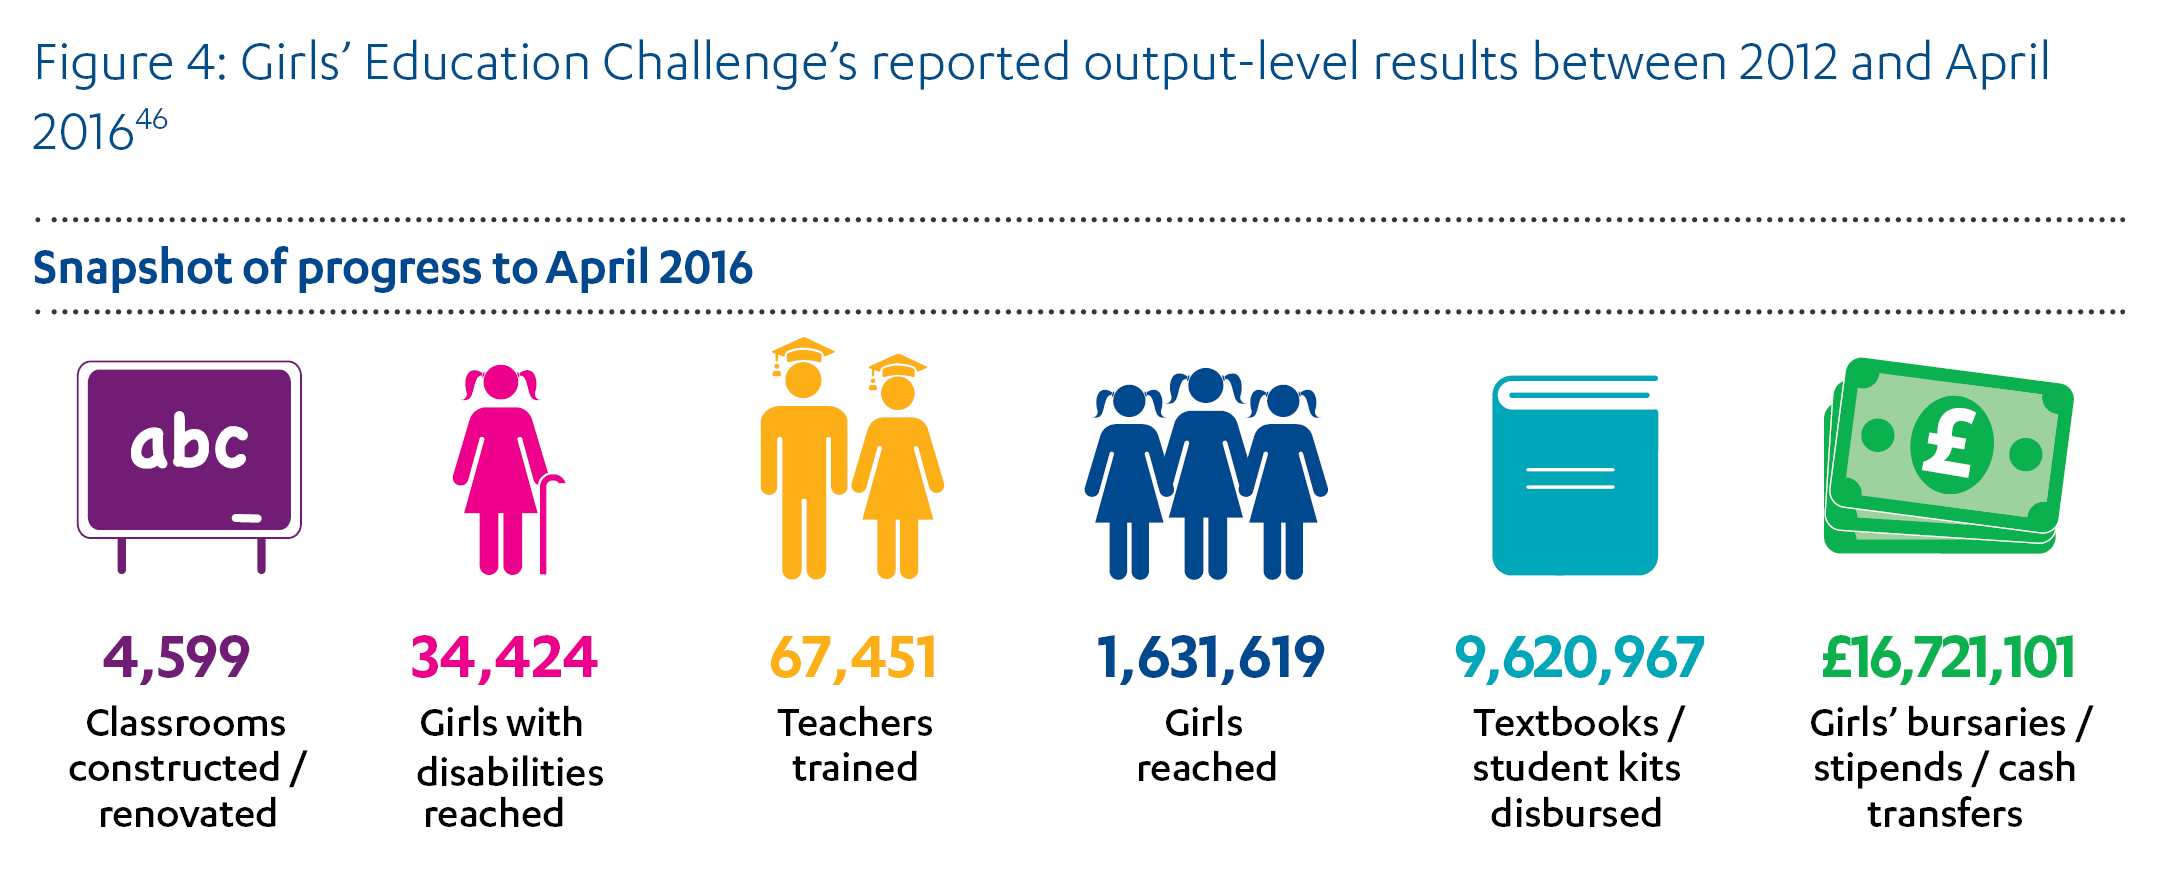 Figure 4: Girls’ Education Challenge’s reported output-level results between 2012 and April 2016